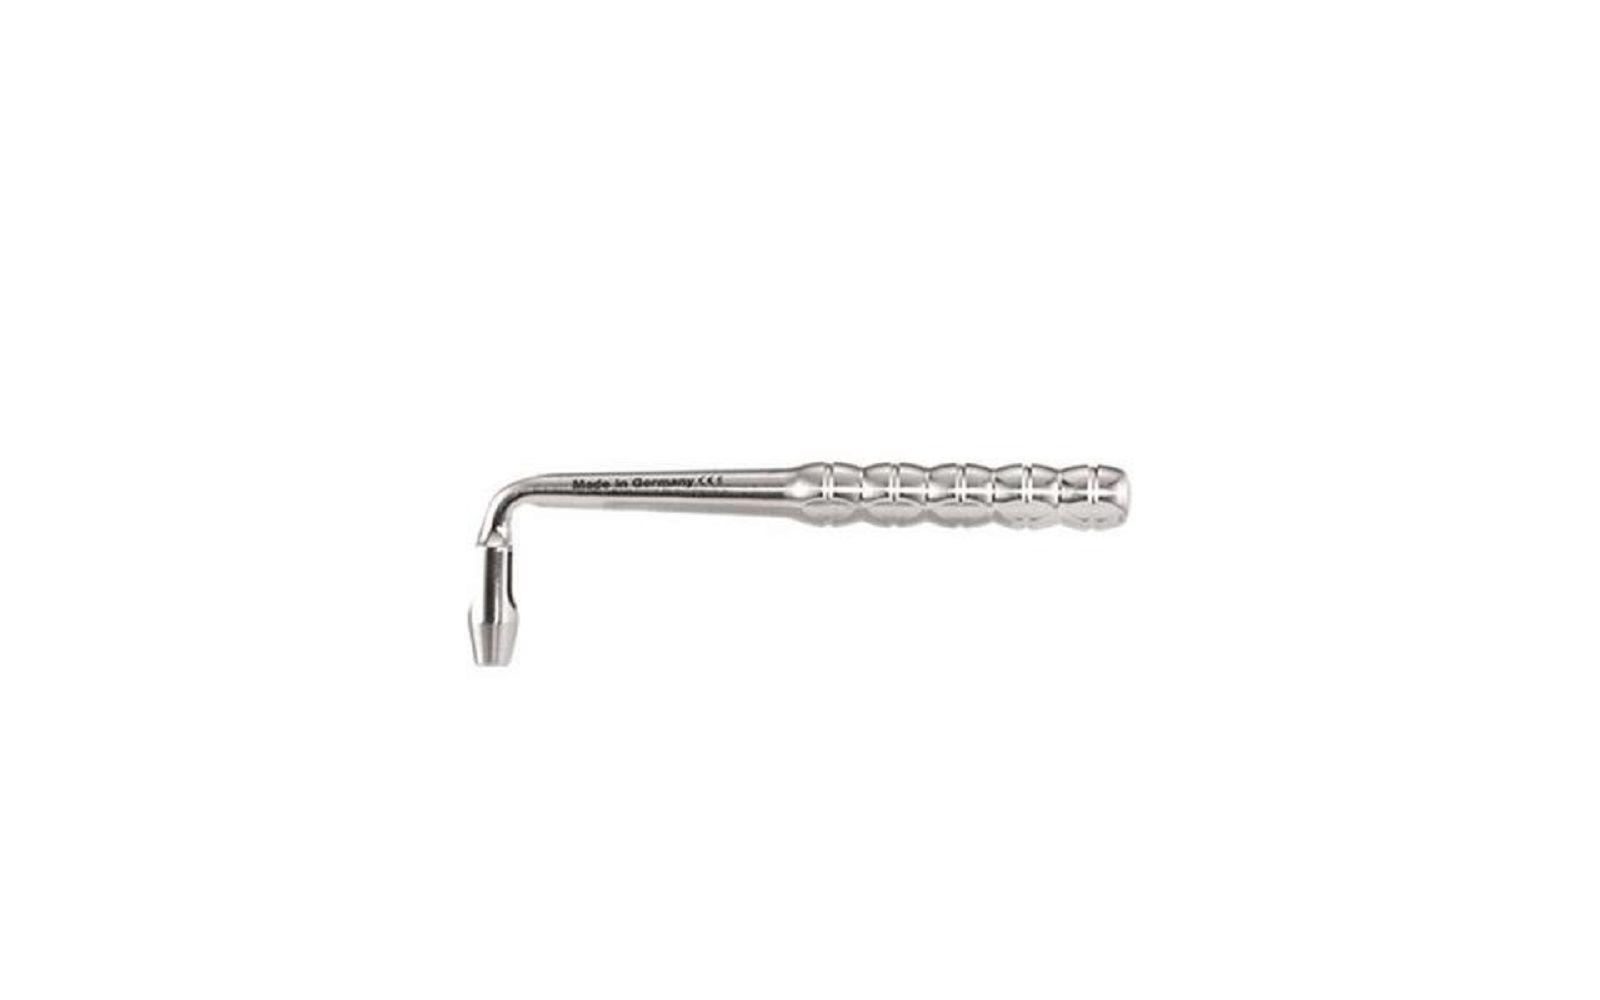 Tissue punch – # 4, keyes, stainless steel, 4 mm